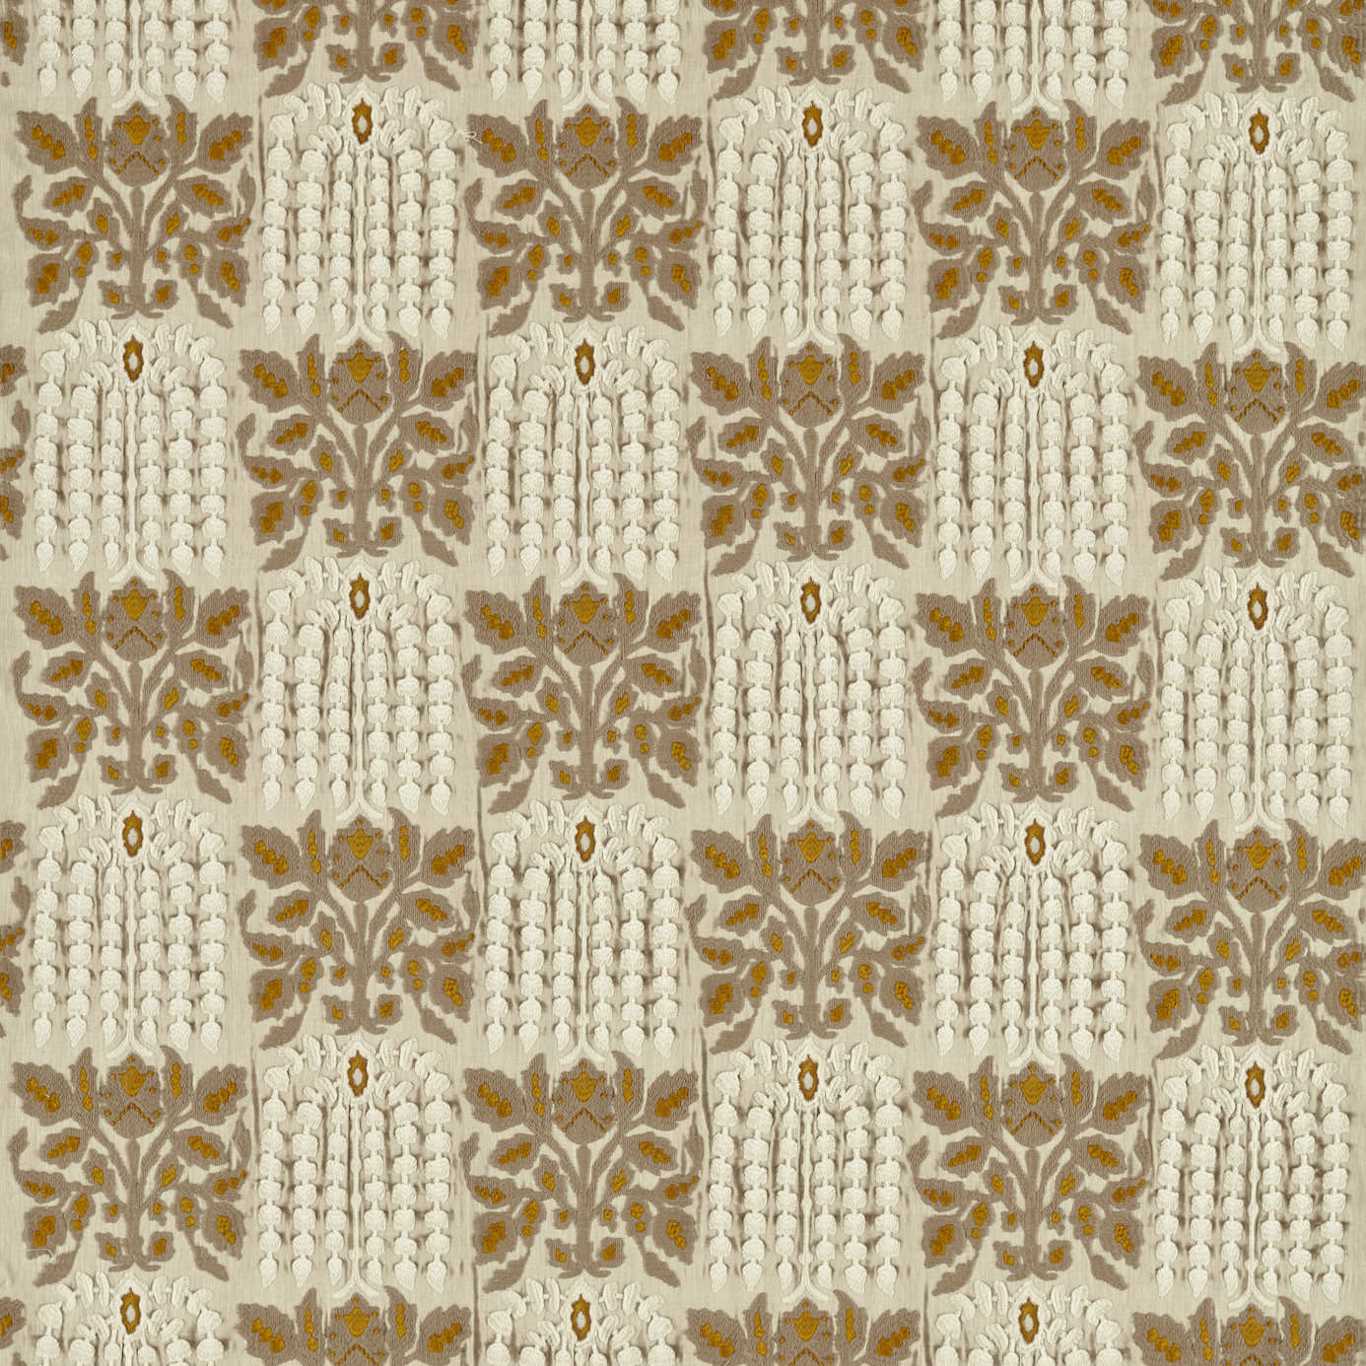 Nirvani Embroidery Antique Gold Fabric by ZOF